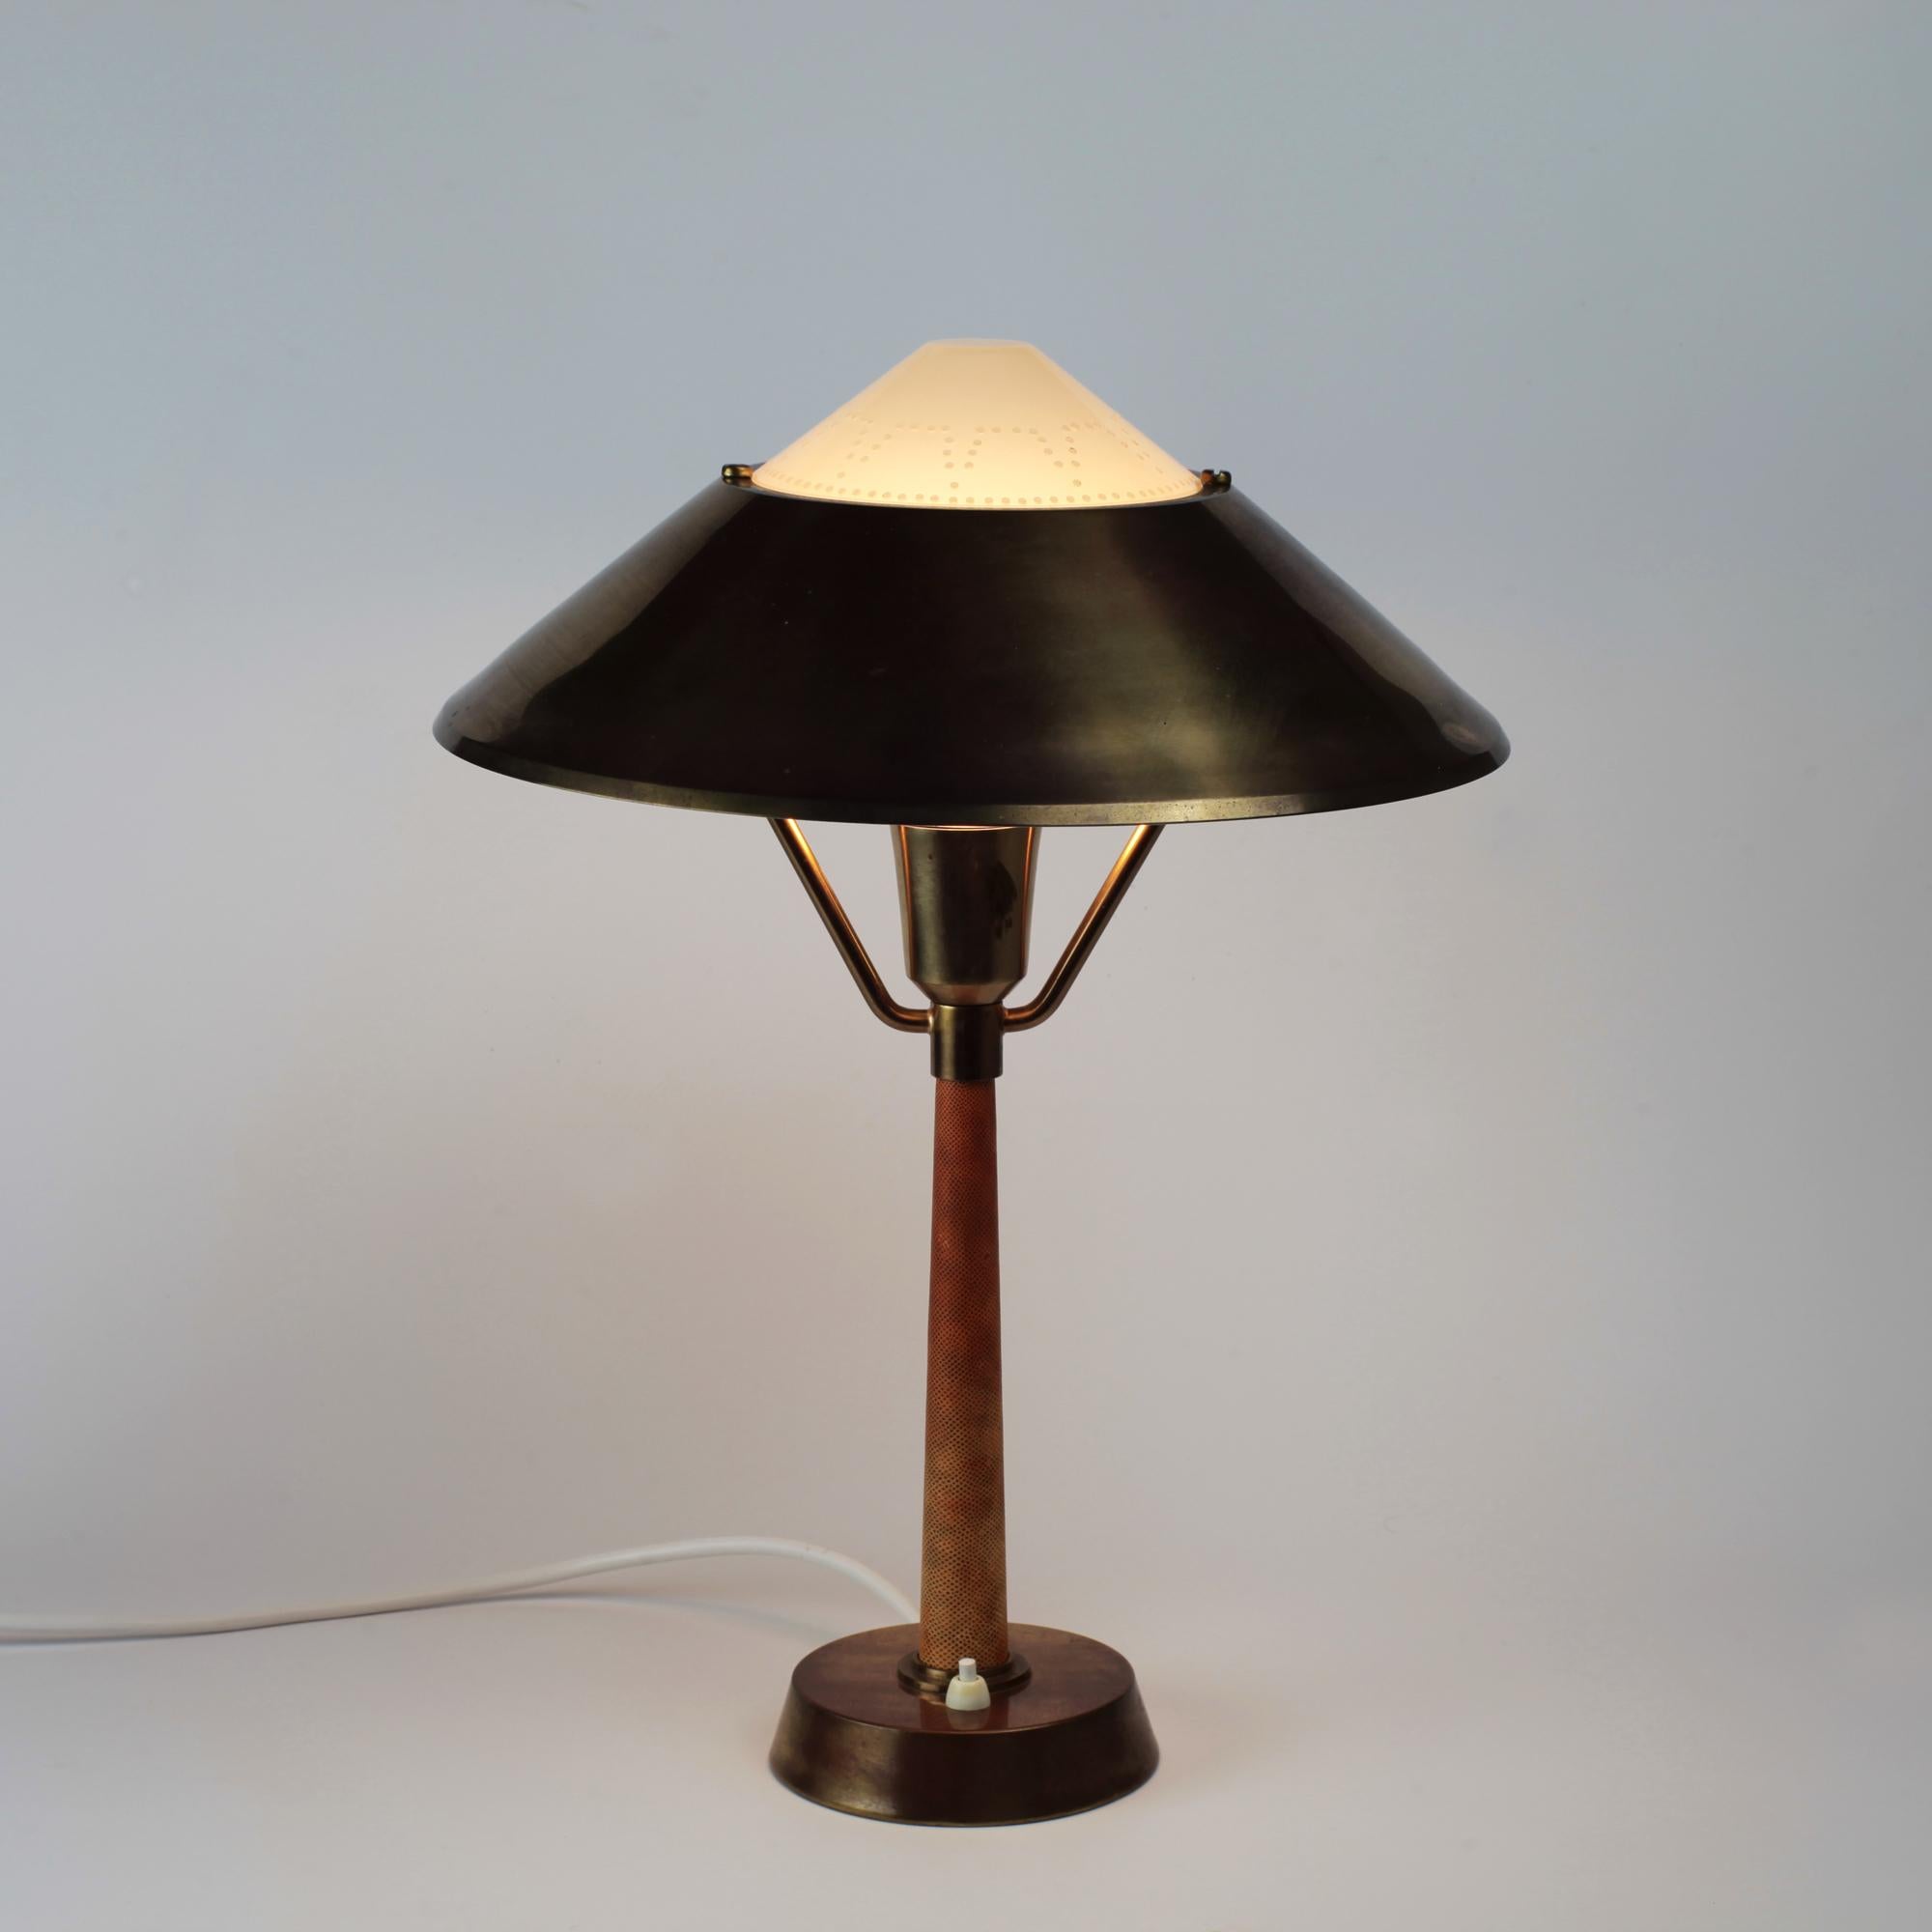 Table lamp with adjustable lamp shade by AB E. Hansson & CO., Sweden, 1960s.
Brass, plastic and imitation galuchat
Measures: Height 45 cm, diameter 35 cm.